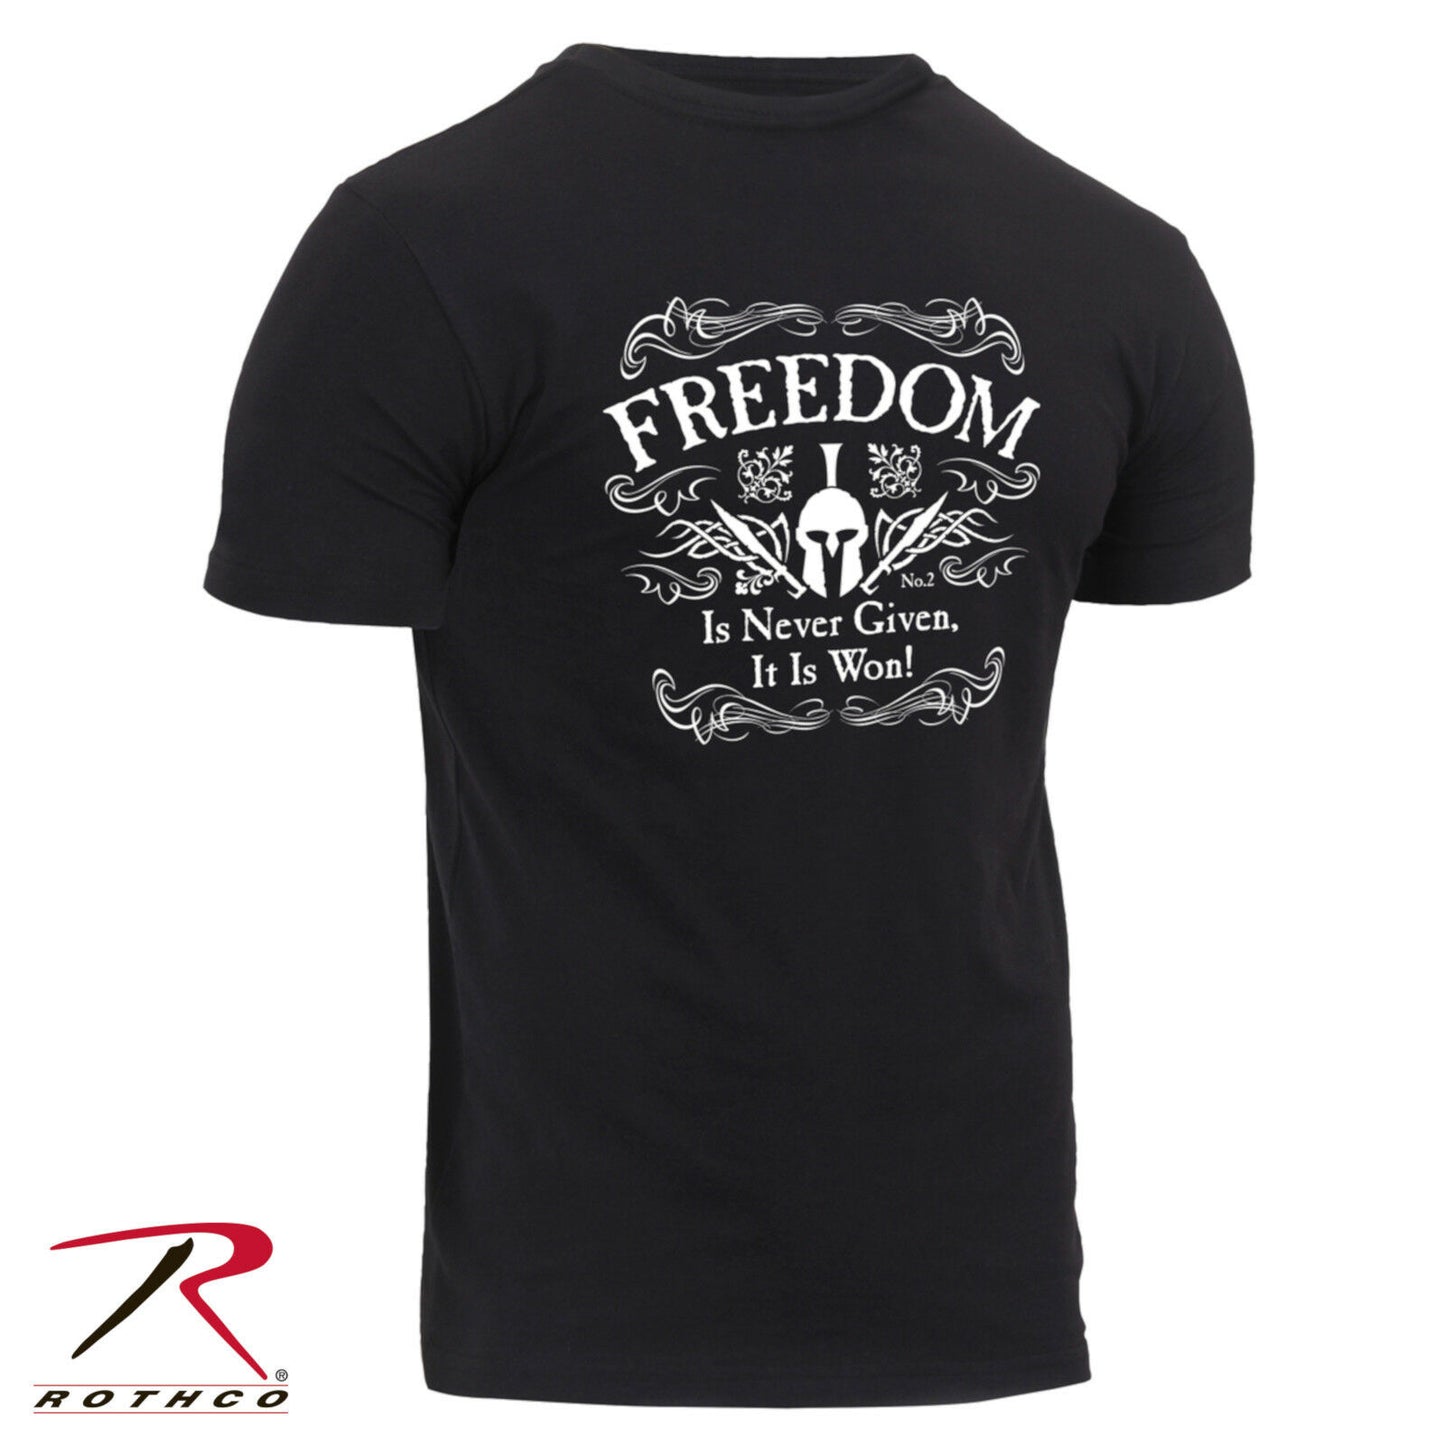 Rothco Men's Athletic Fit 'Freedom' Tactical T-Shirt In Black